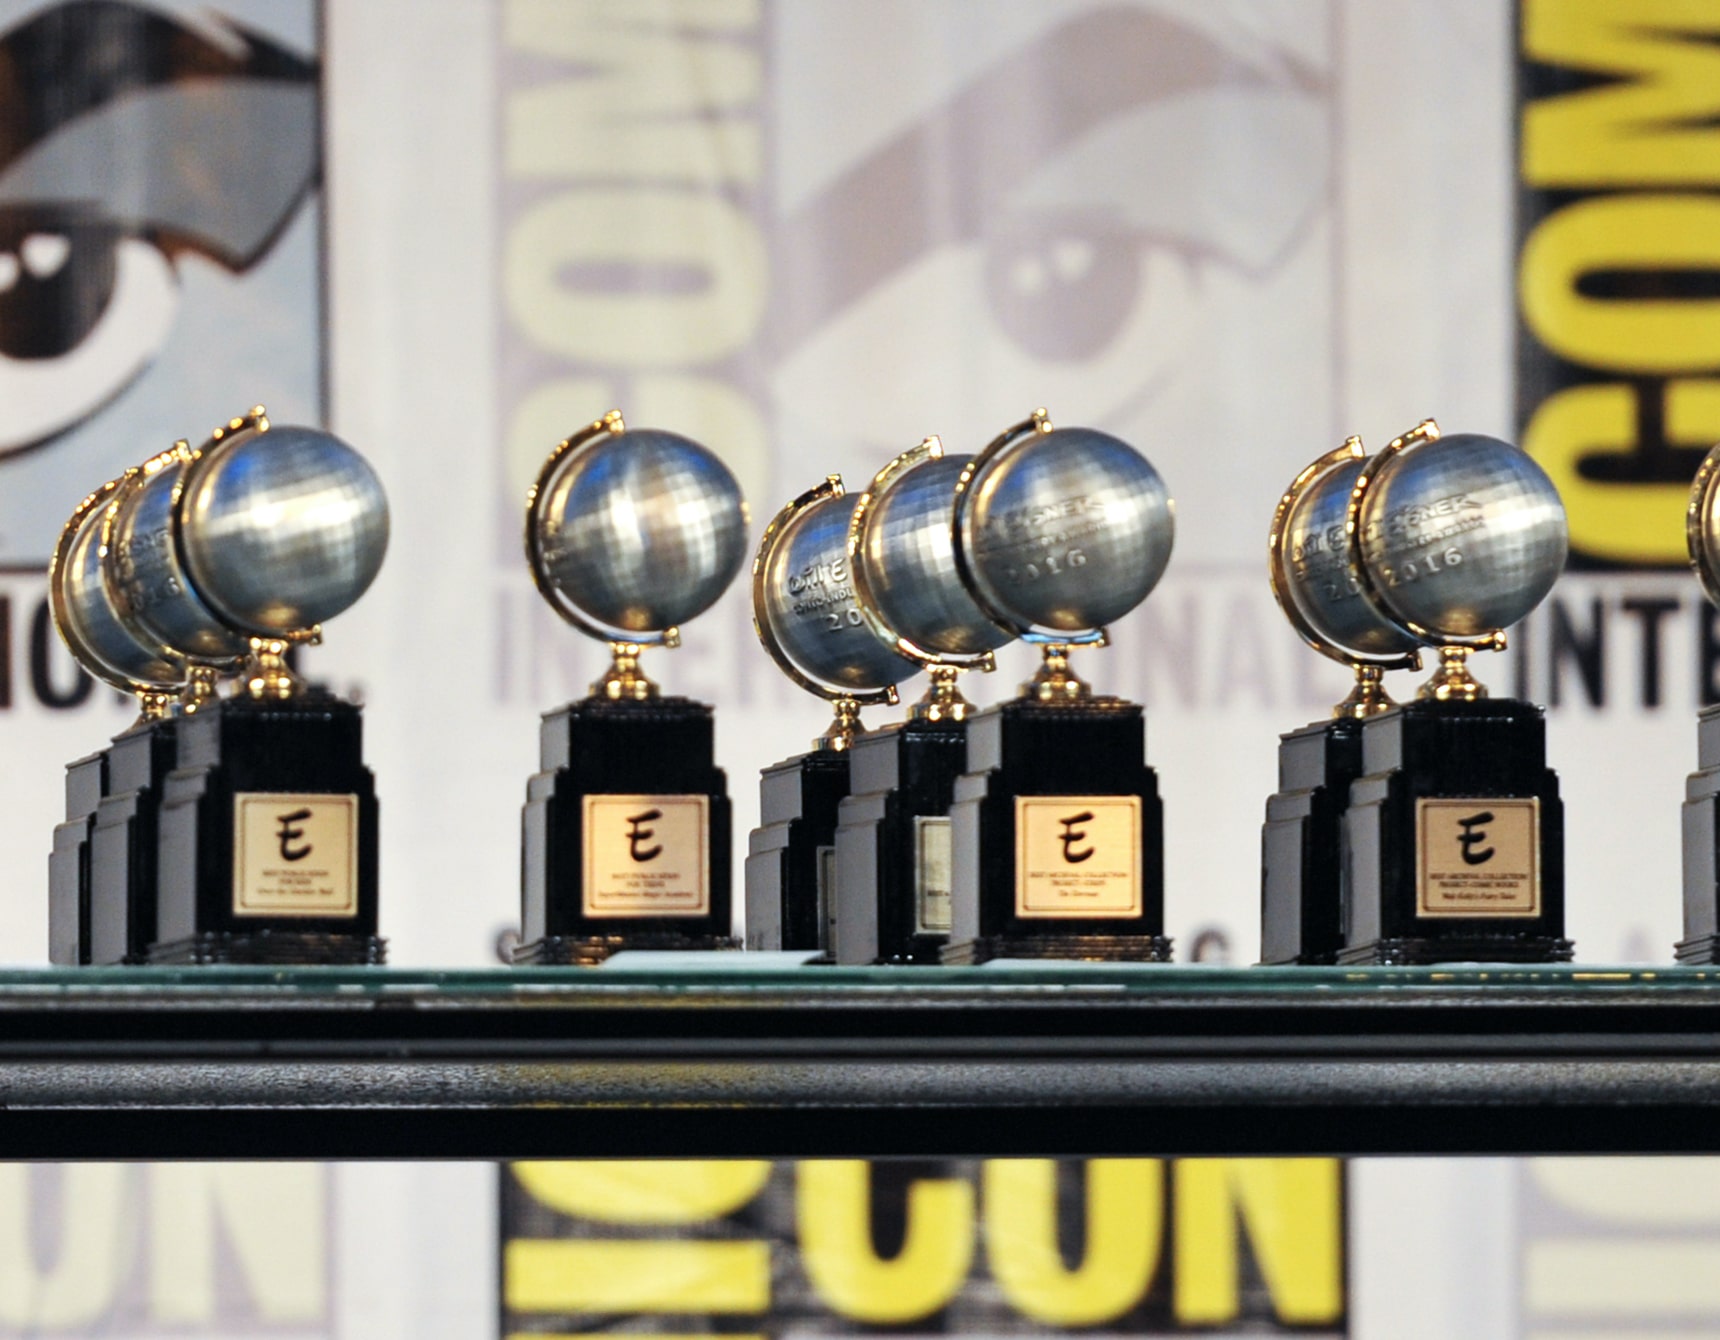 2020 Eisner Awards nominations are in with Dark Horse, IDW, and First Second collecting the most nominations